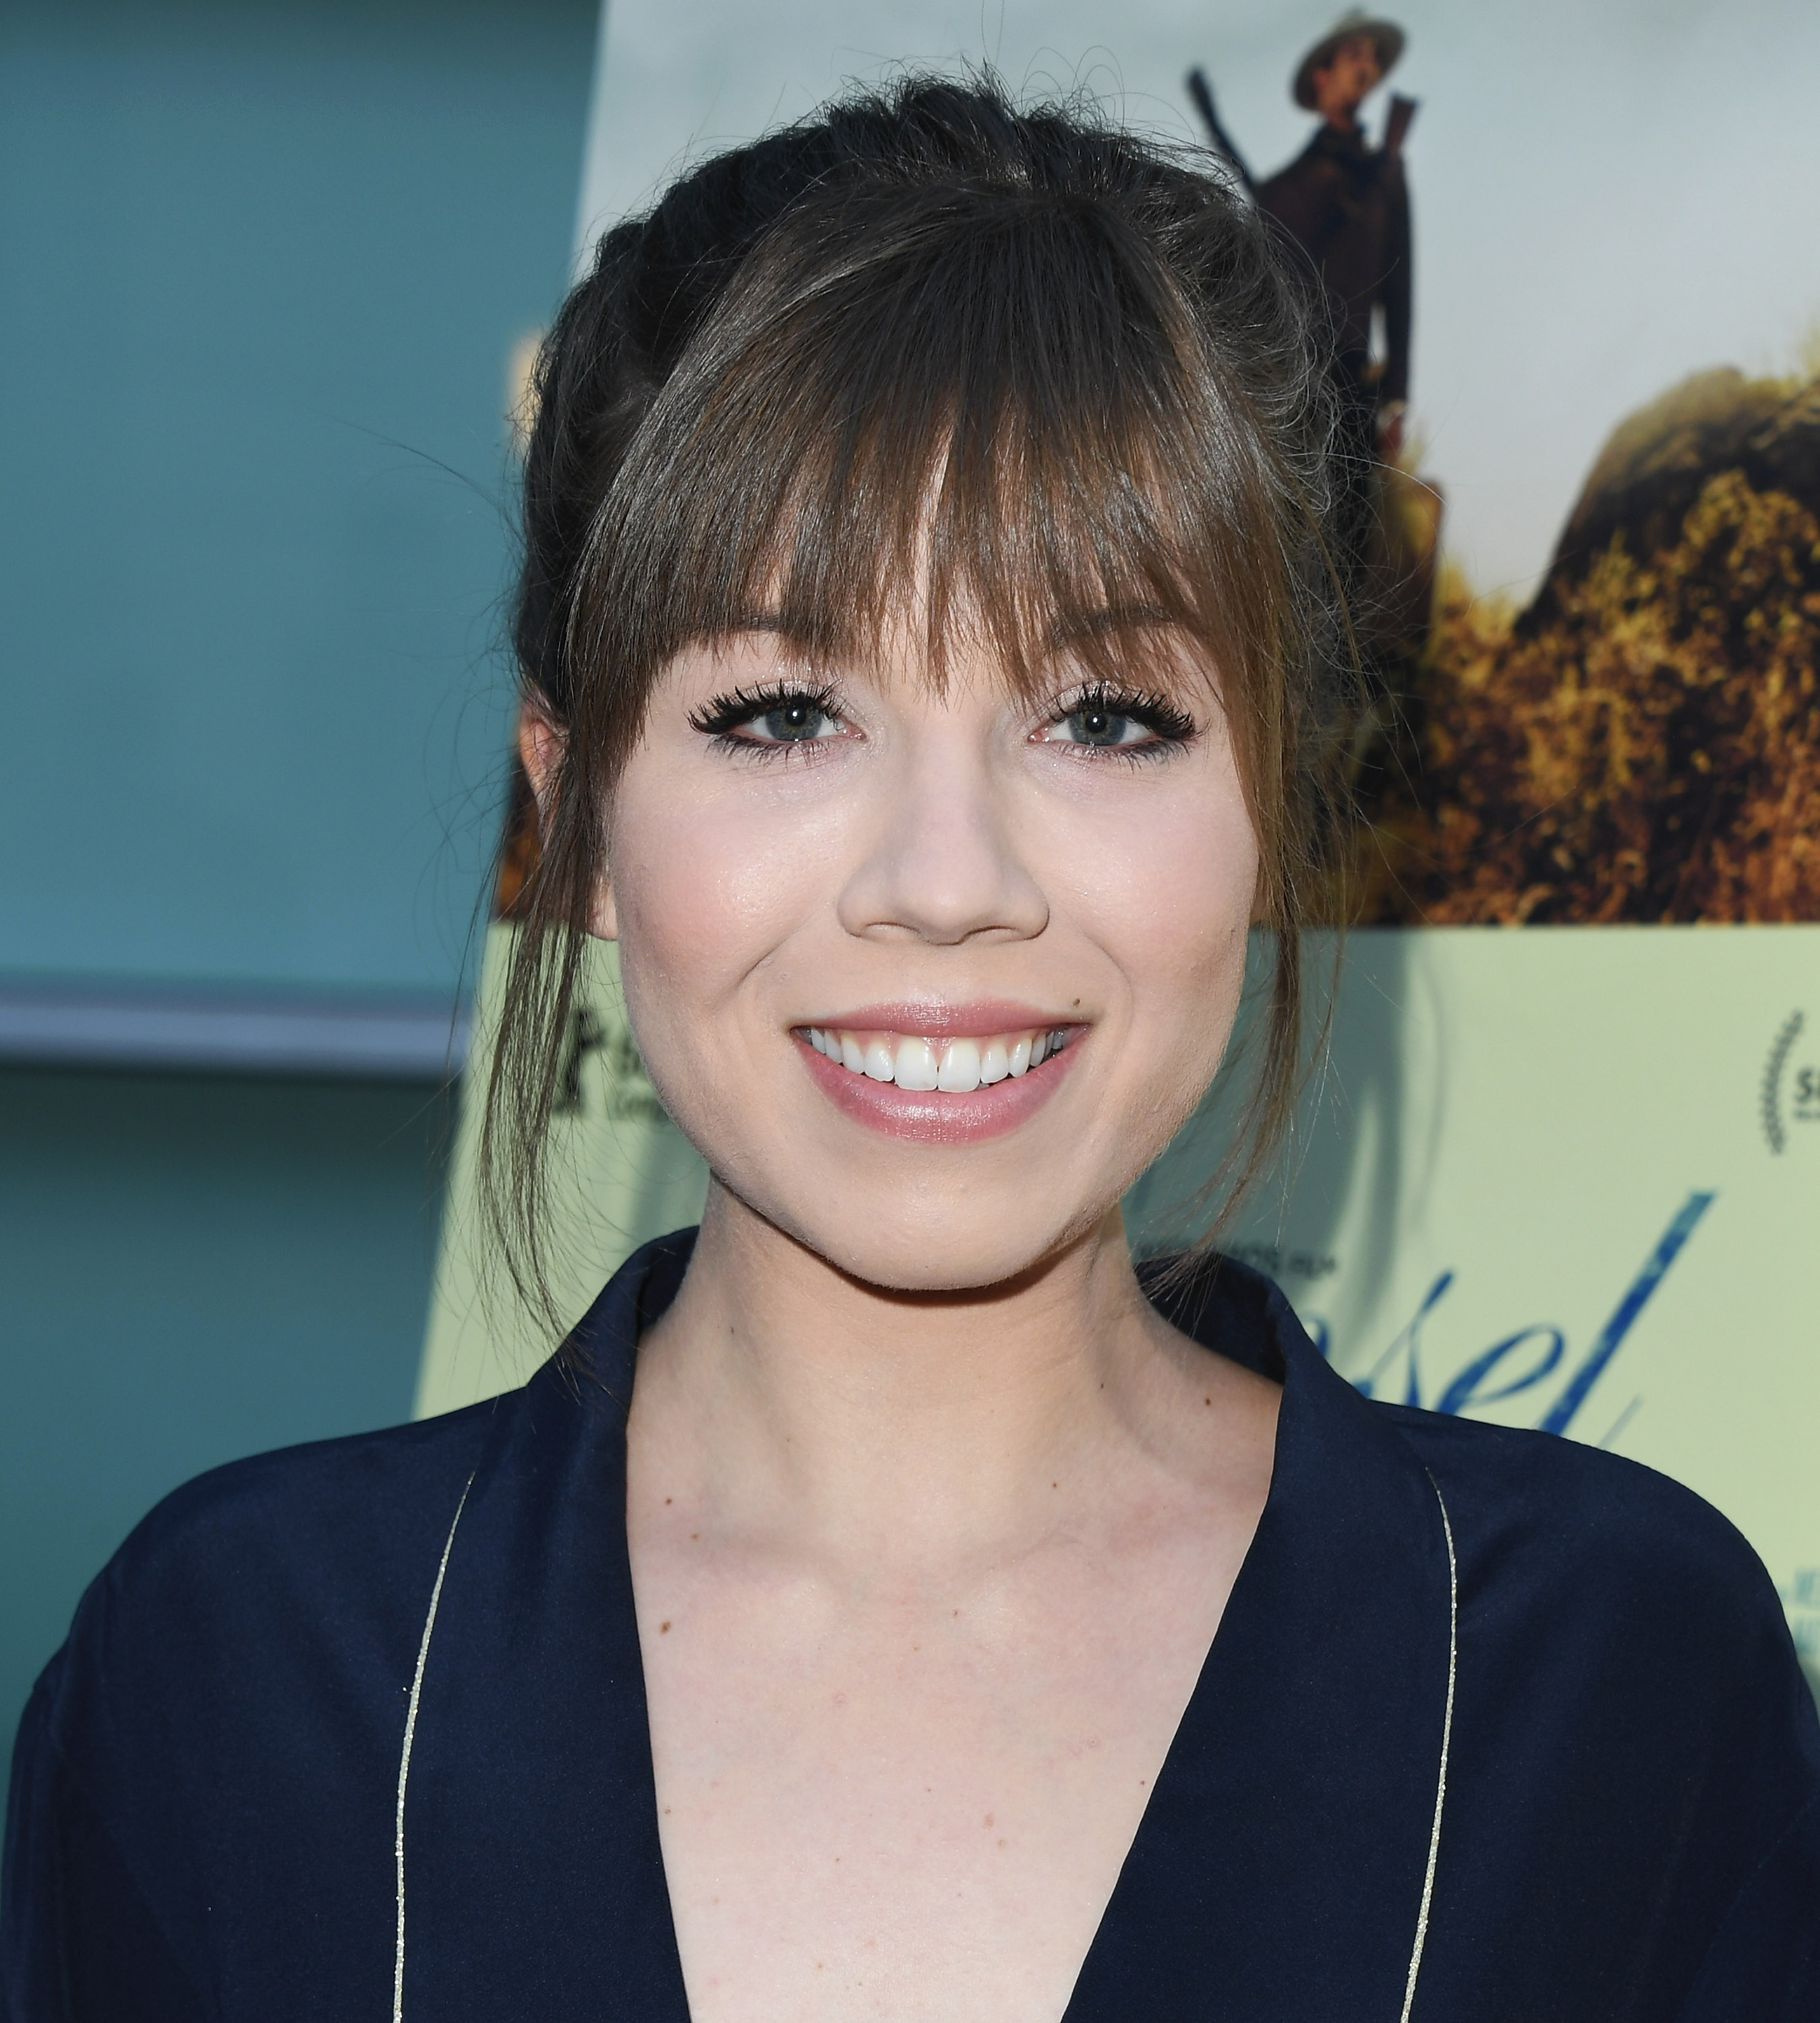 Jennette McCurdy attends the "Damsel" premiere on June 13, 2018 | Source: Getty Images